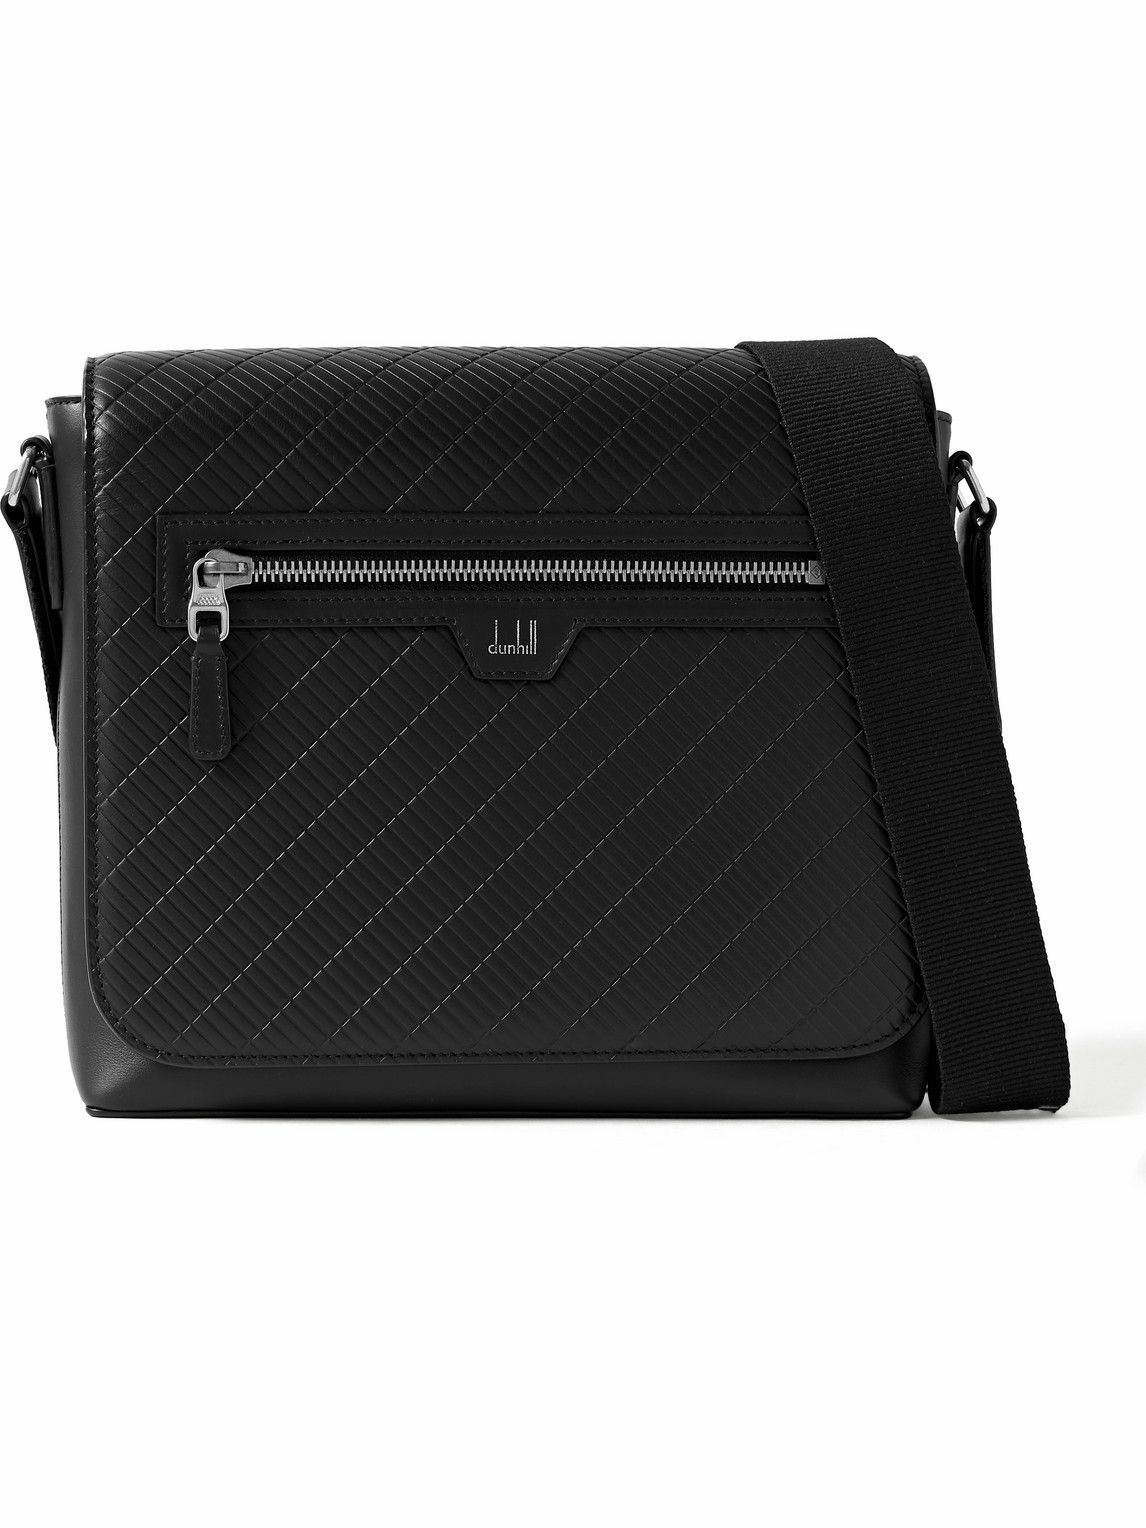 Photo: Dunhill - Contour Embossed Leather Messenger Bag